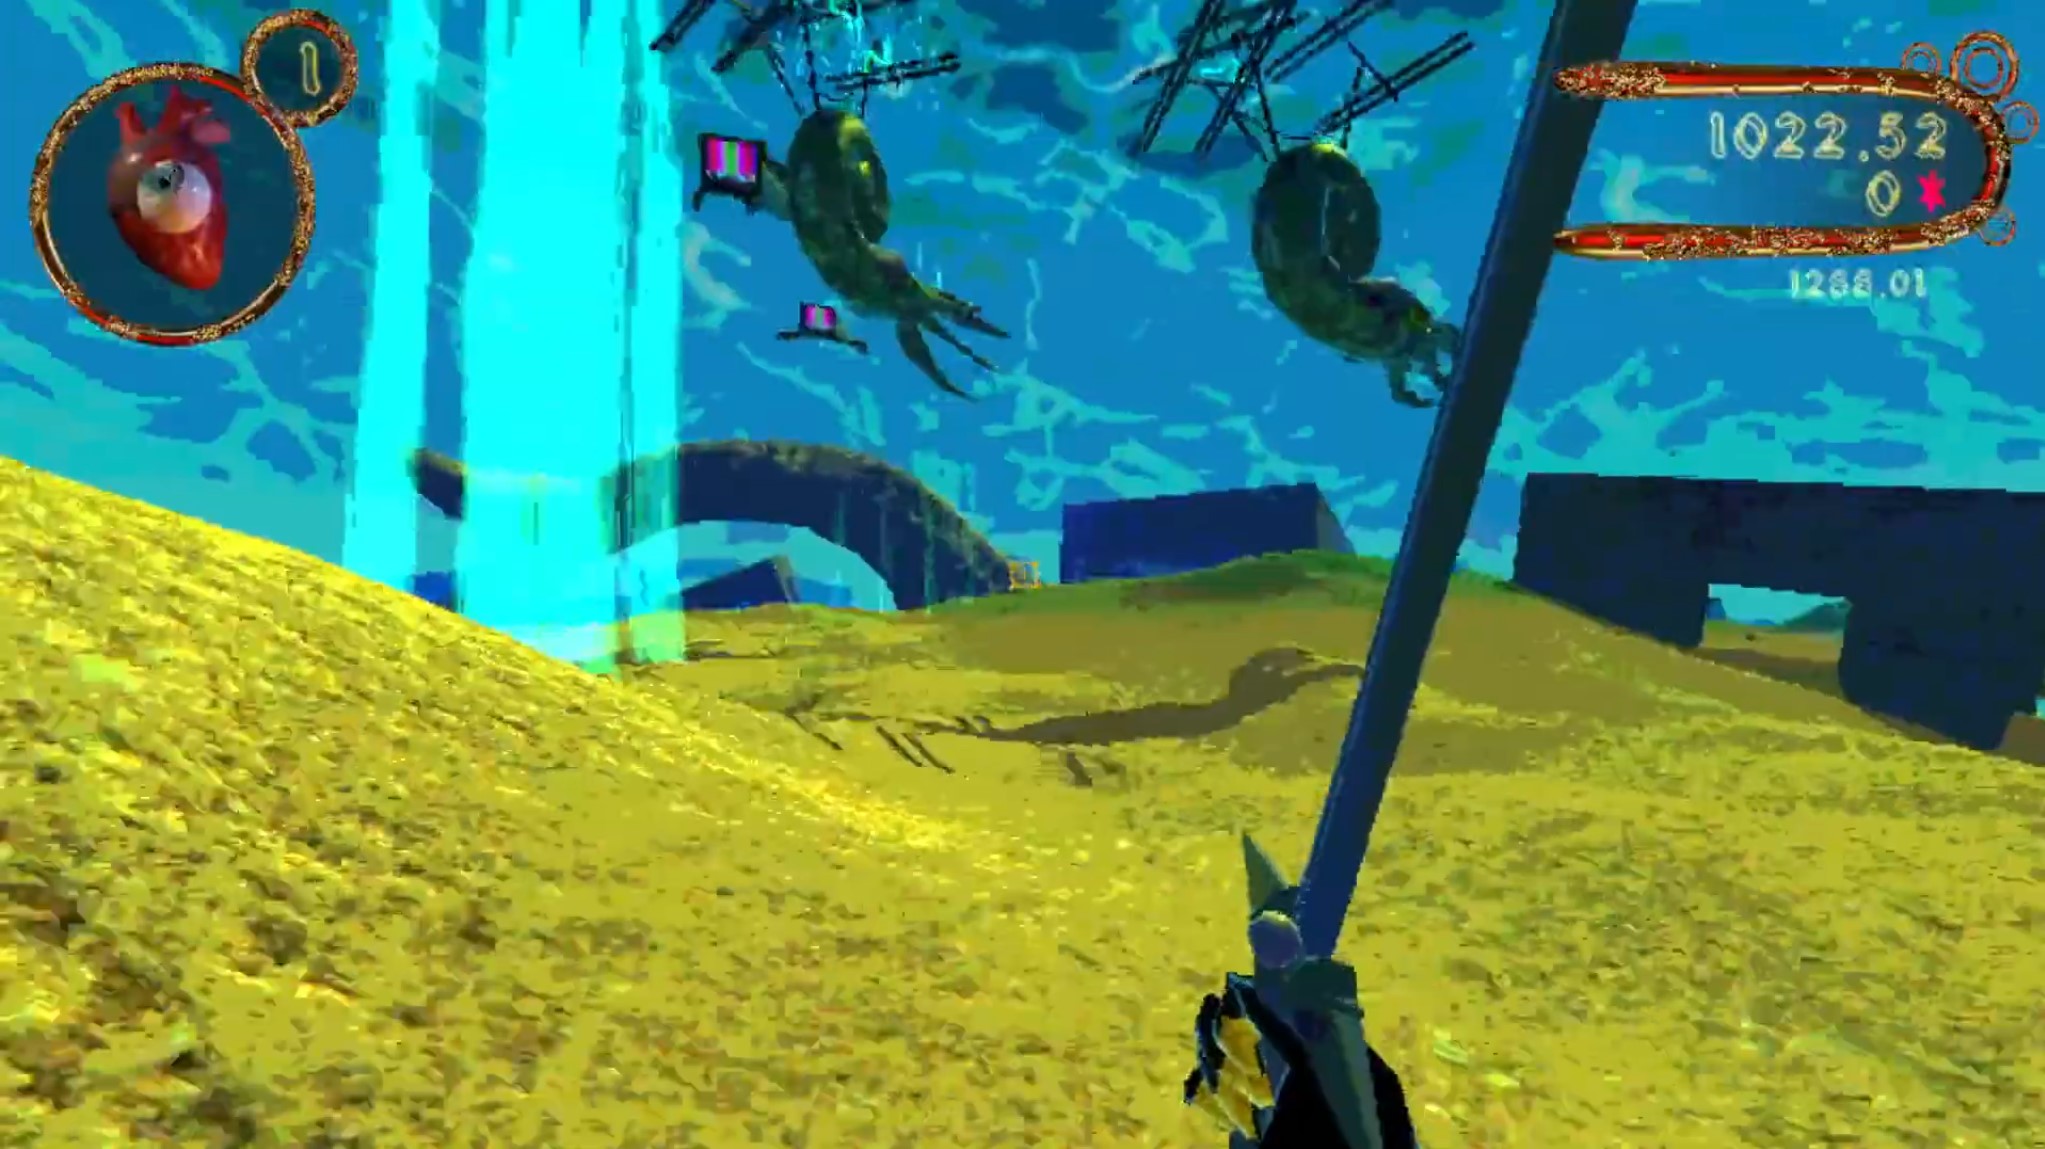 Another view of the sunken grounds in Dreamwild